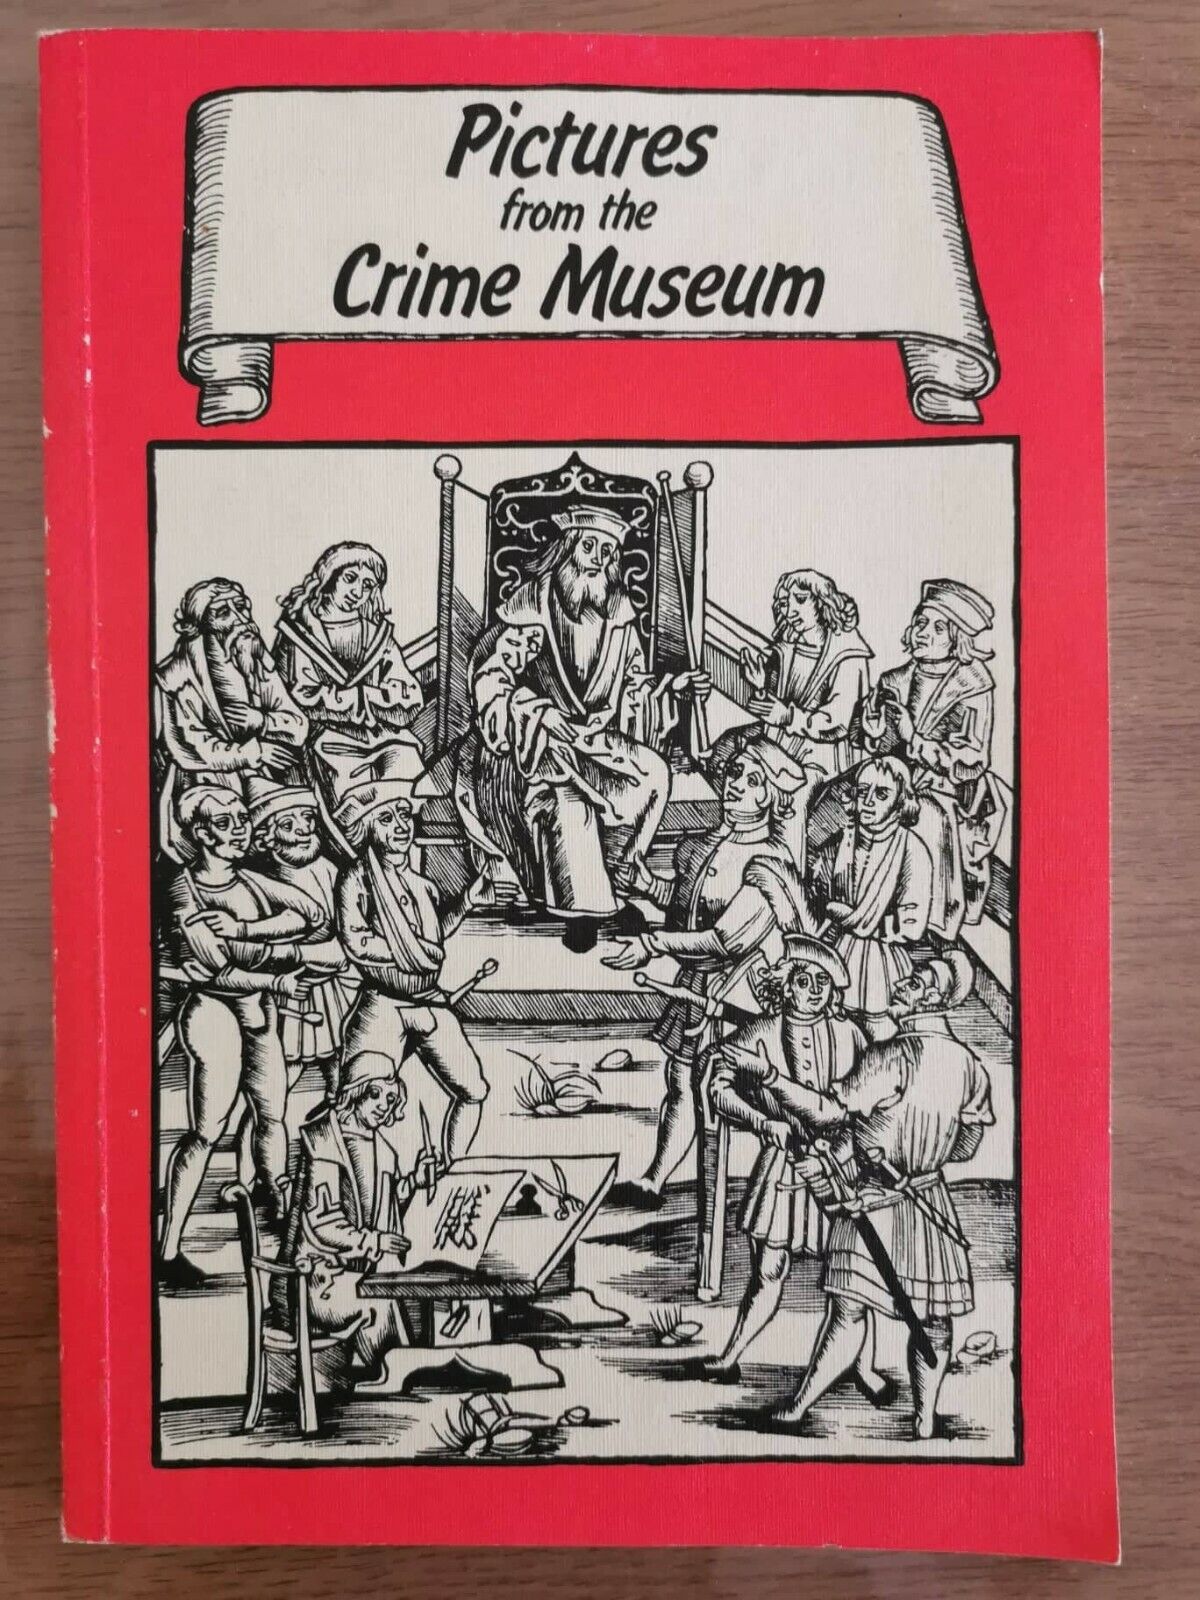 Pictures from the Crime Museum-AA. VV.- Mittelalterliches Kriminalmuseum-1985-AR